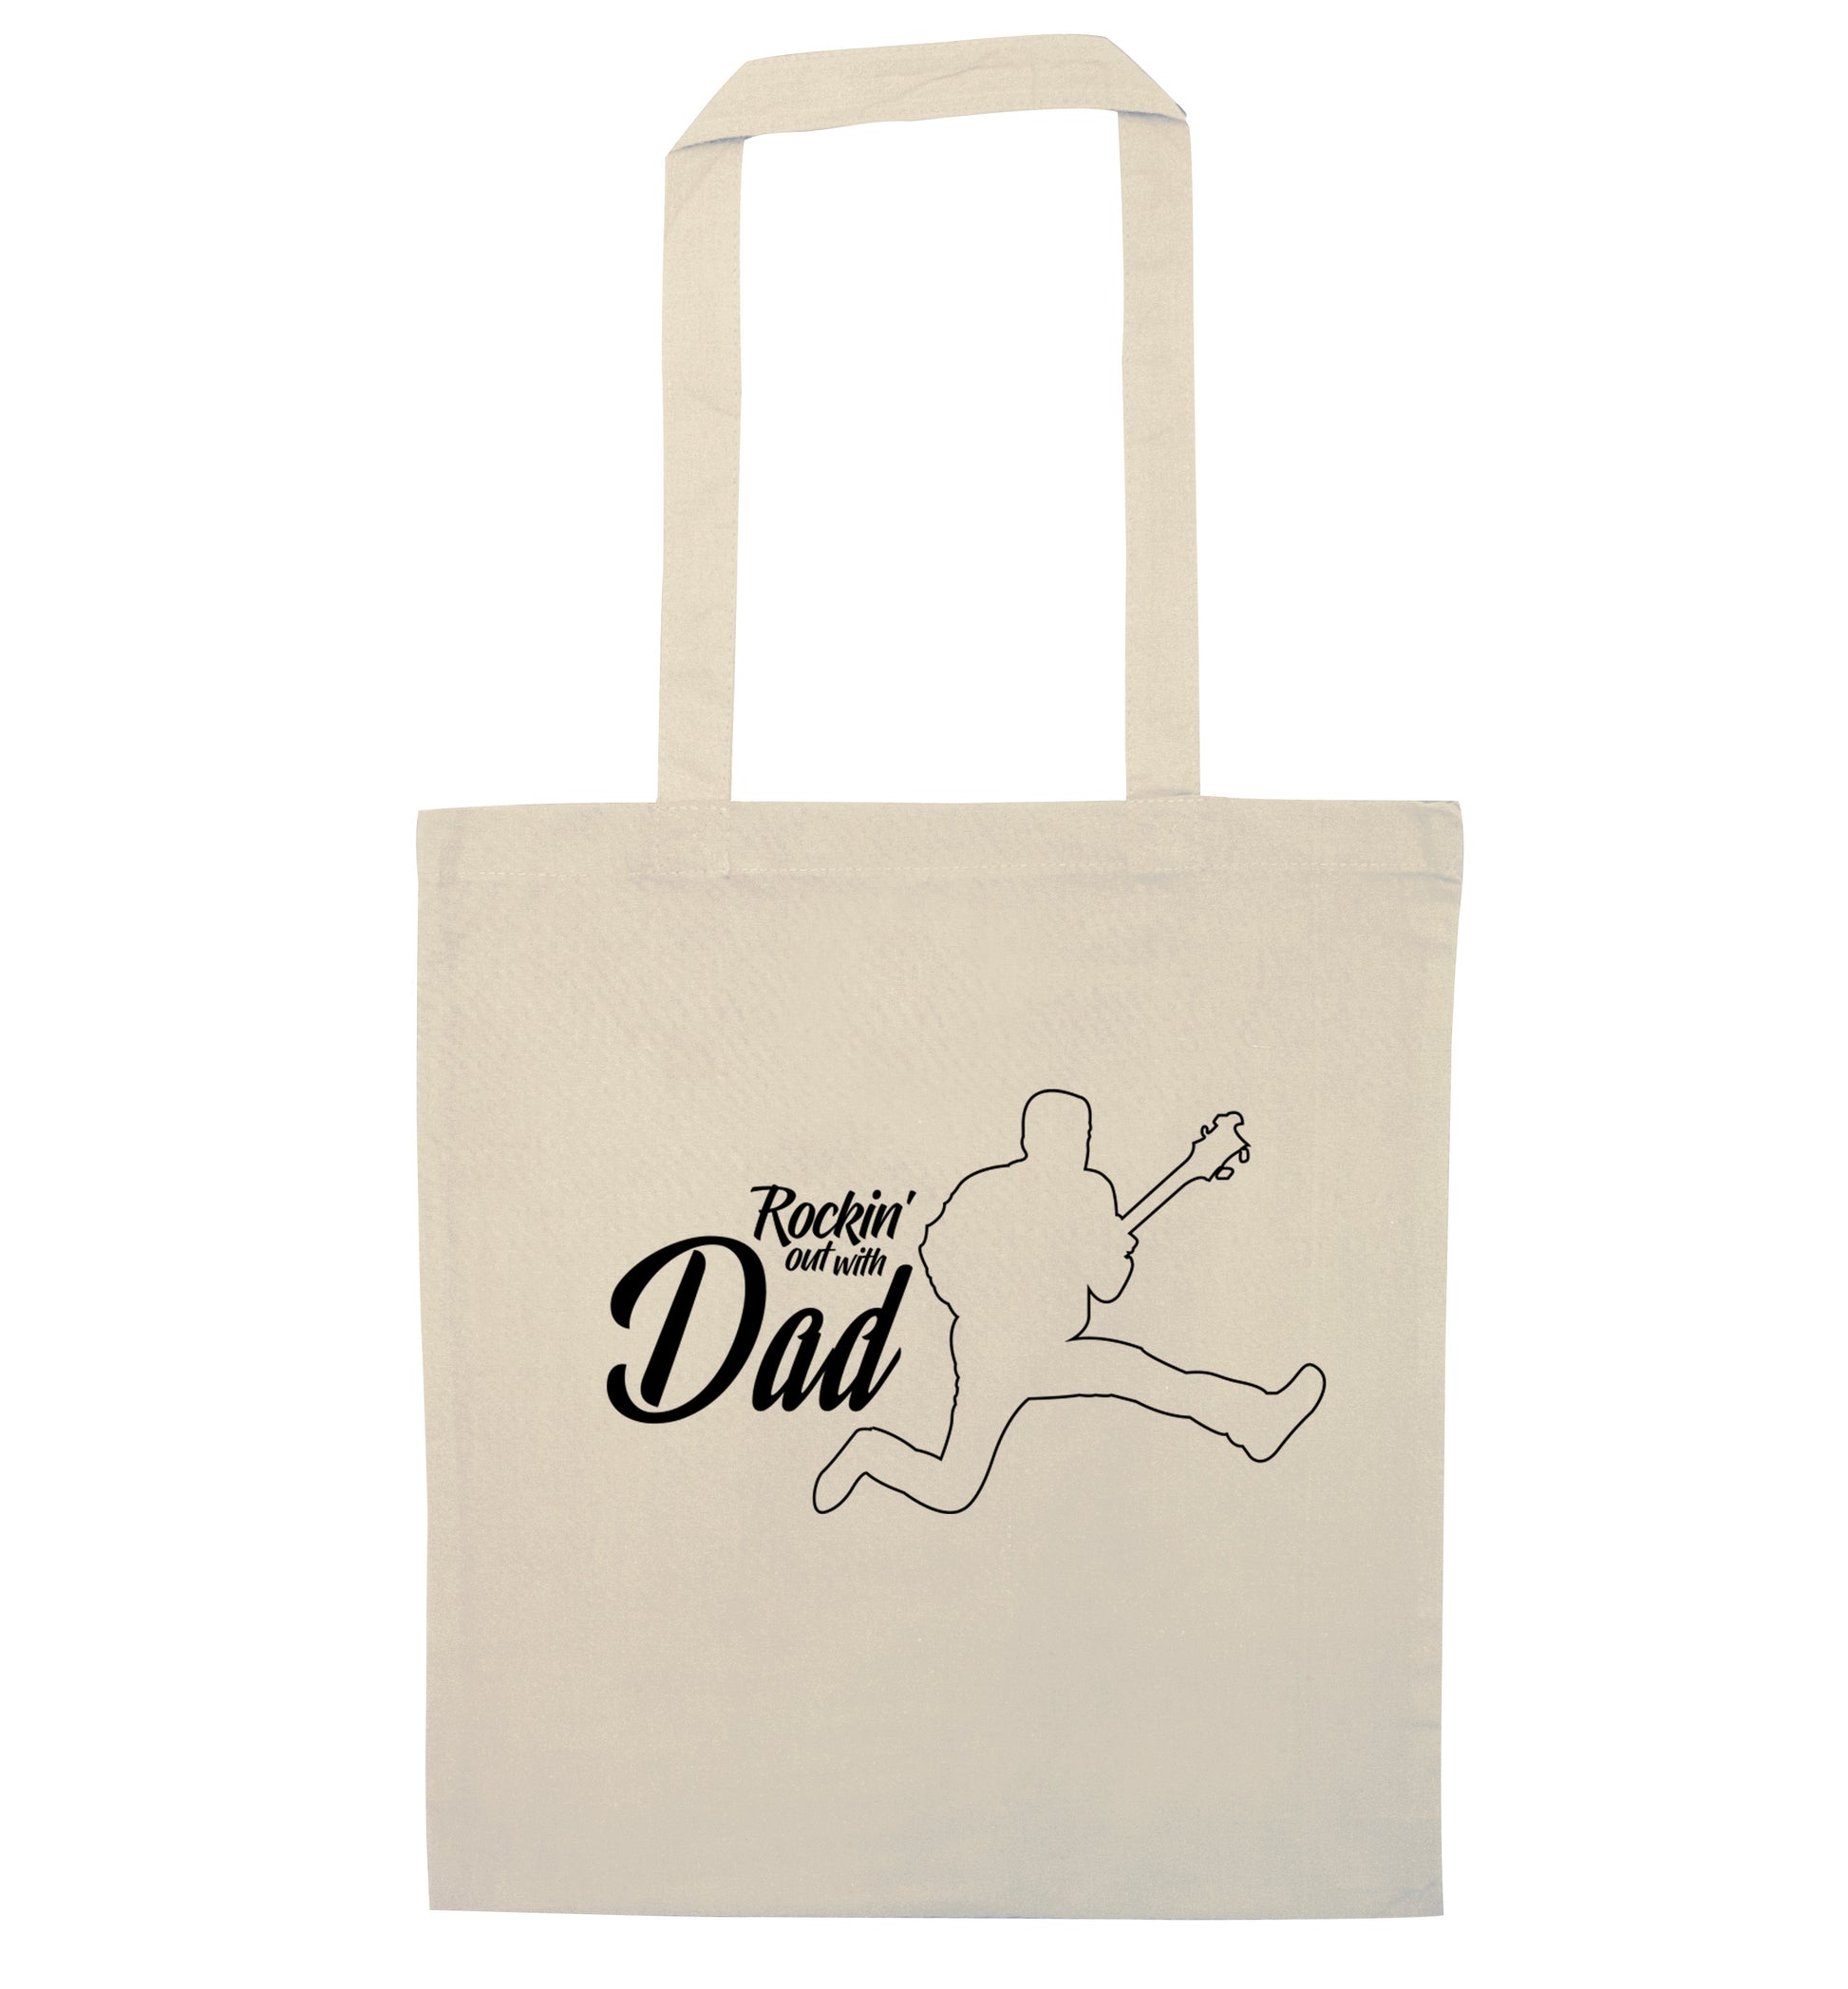 Rockin out with dad natural tote bag